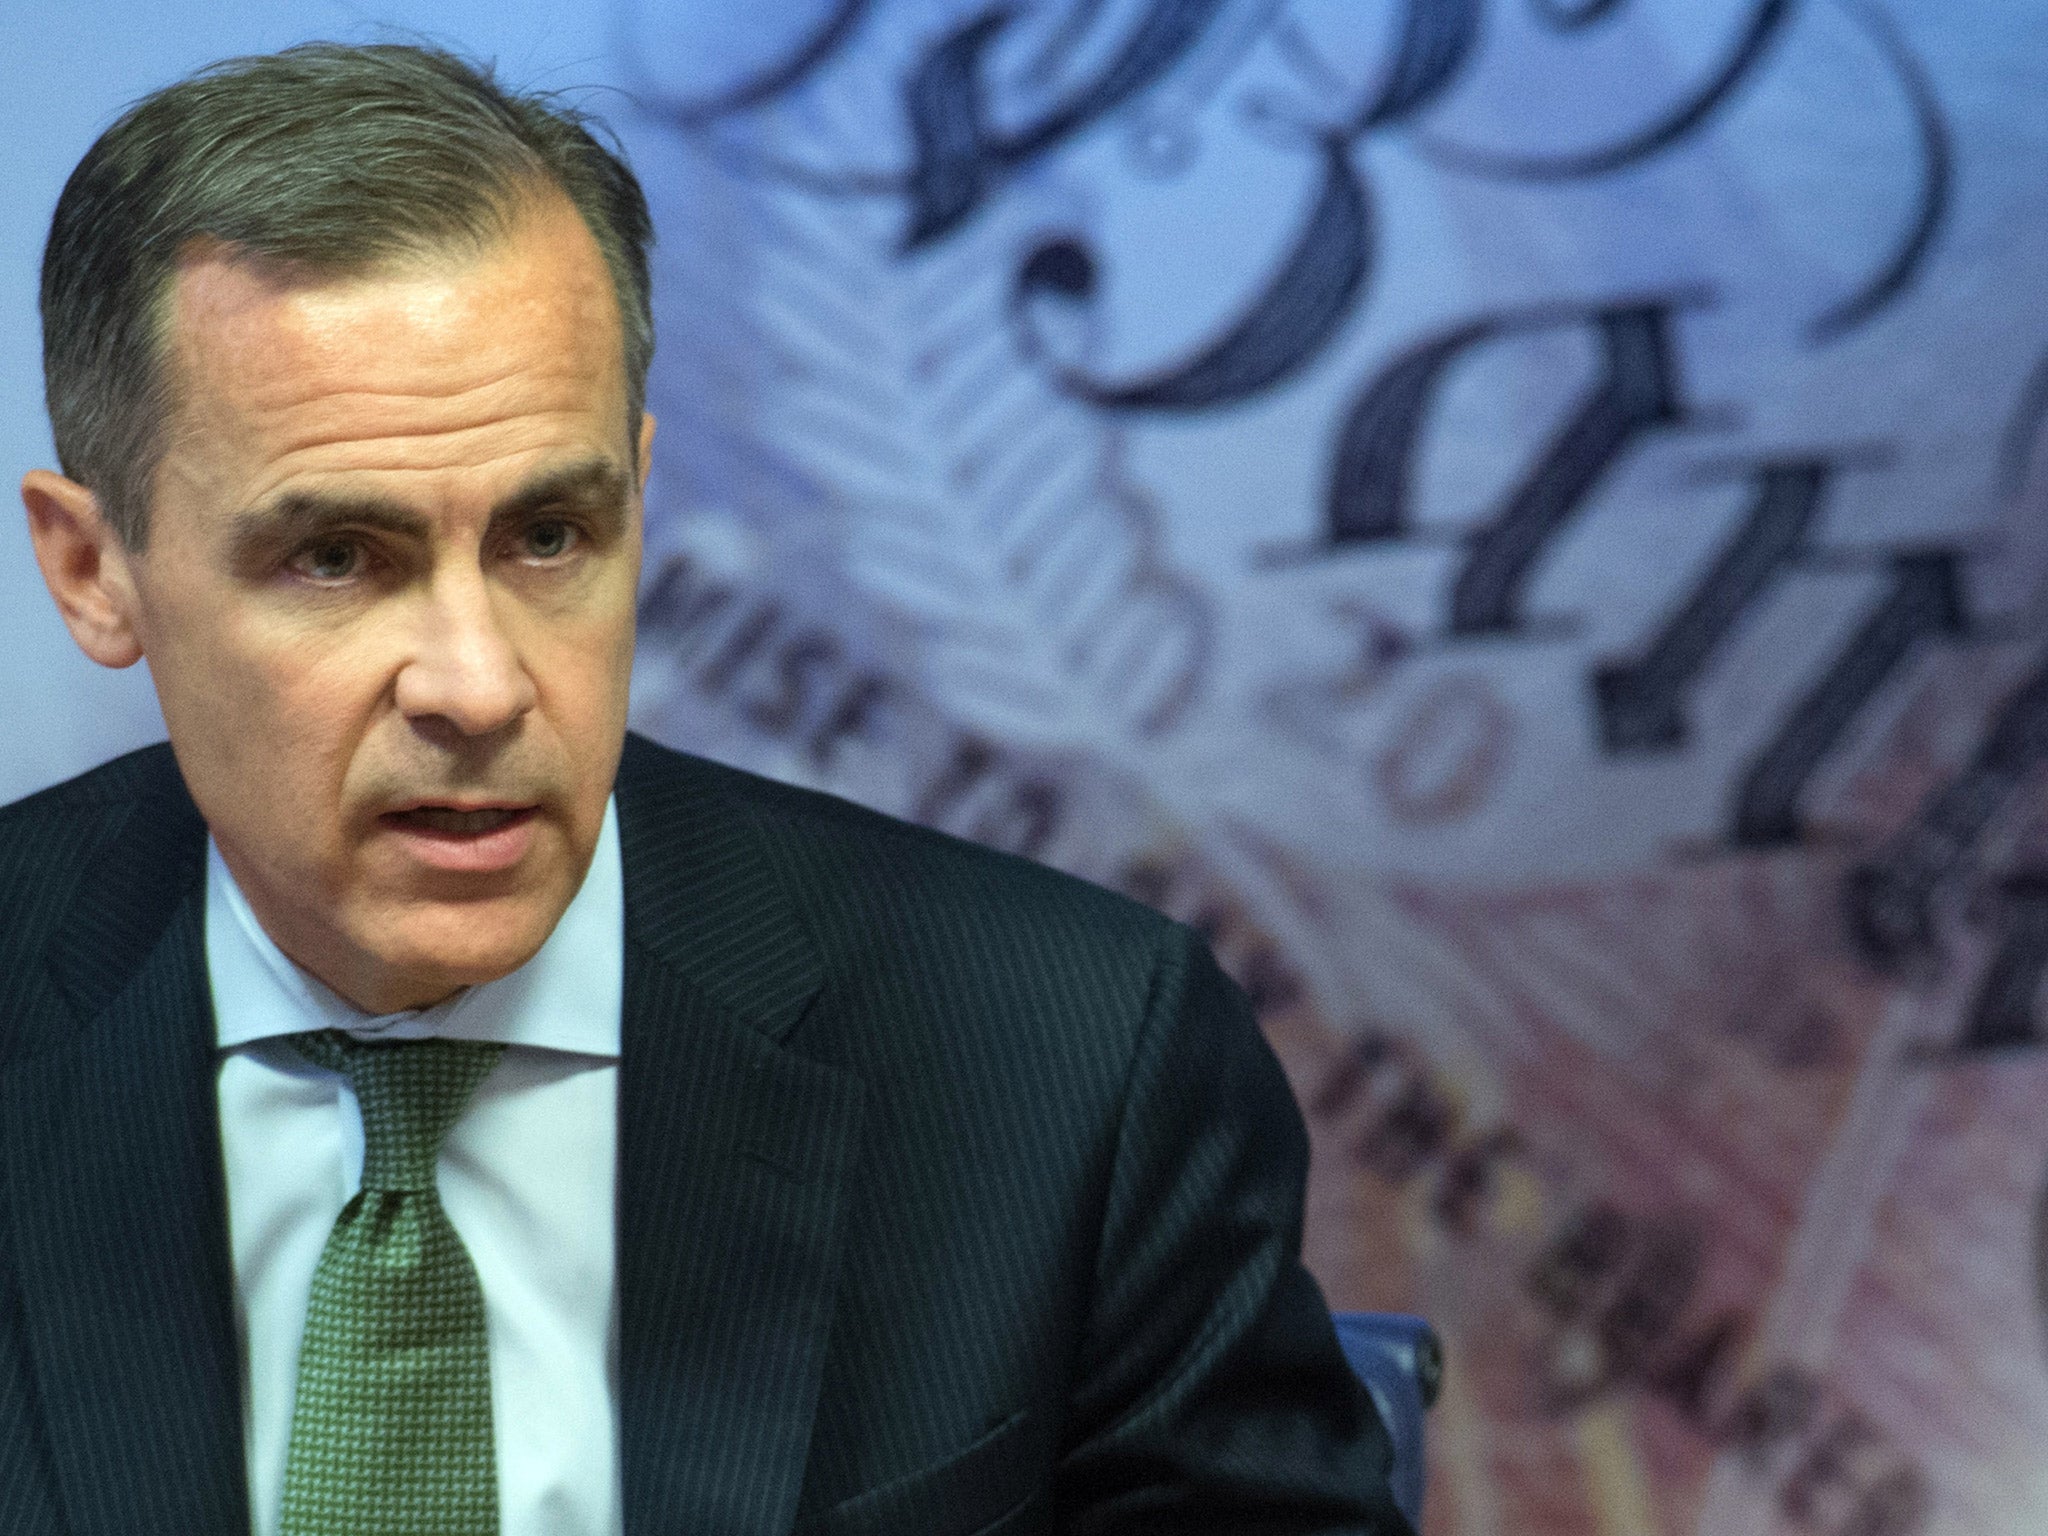 Governor of the Bank of England Mark Carney